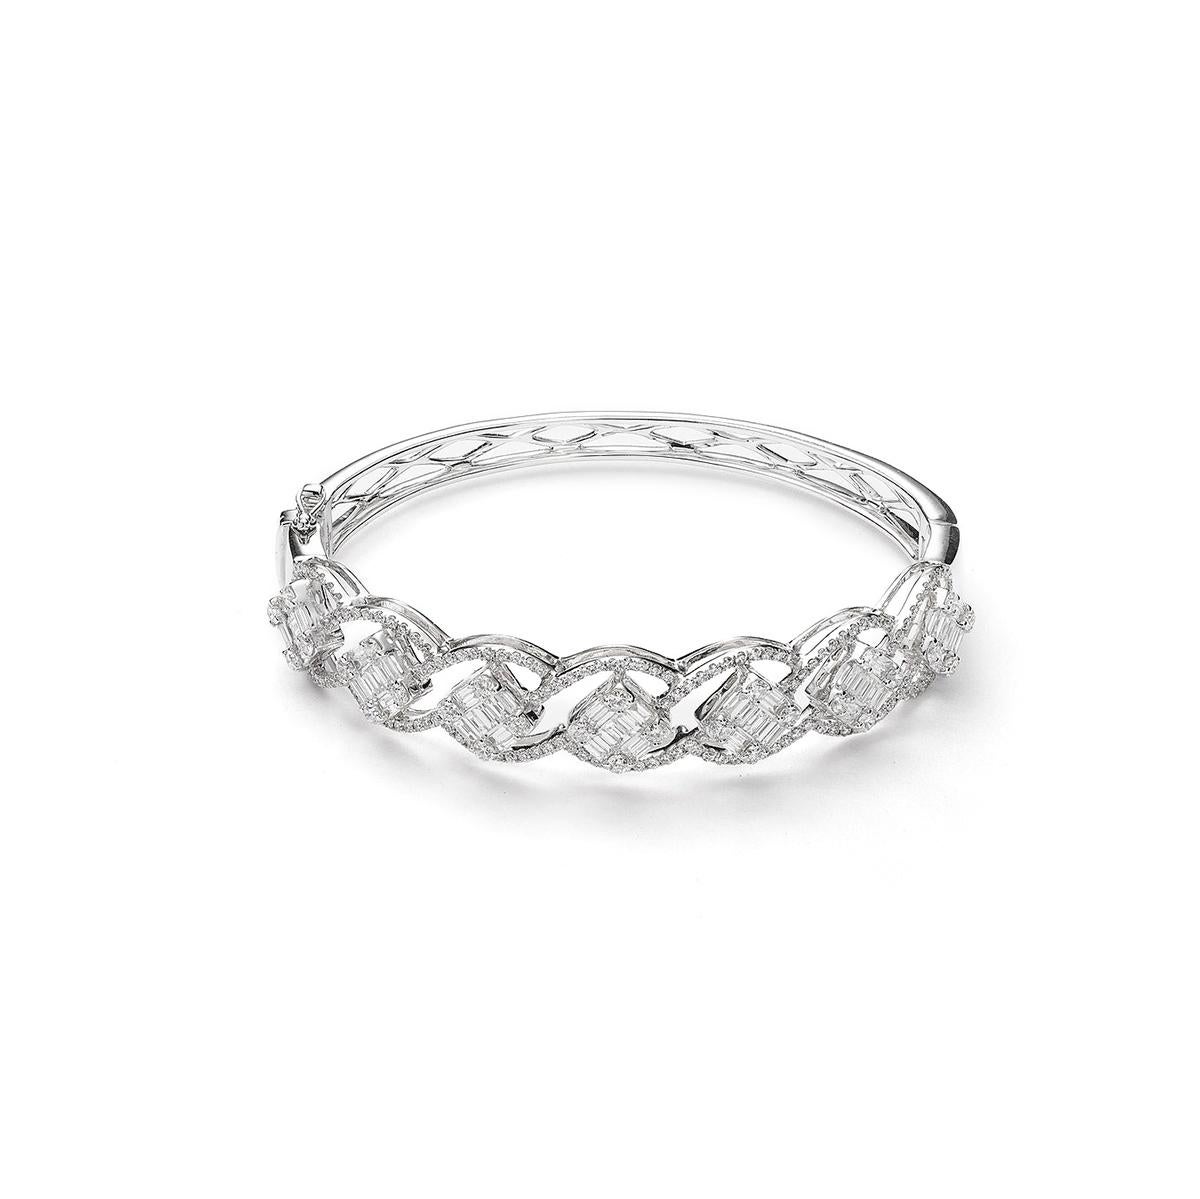 Bangle in 18kt white gold set with 174 diamonds 1.97 cts and 63 baguette cut diamonds 1.65 cts        